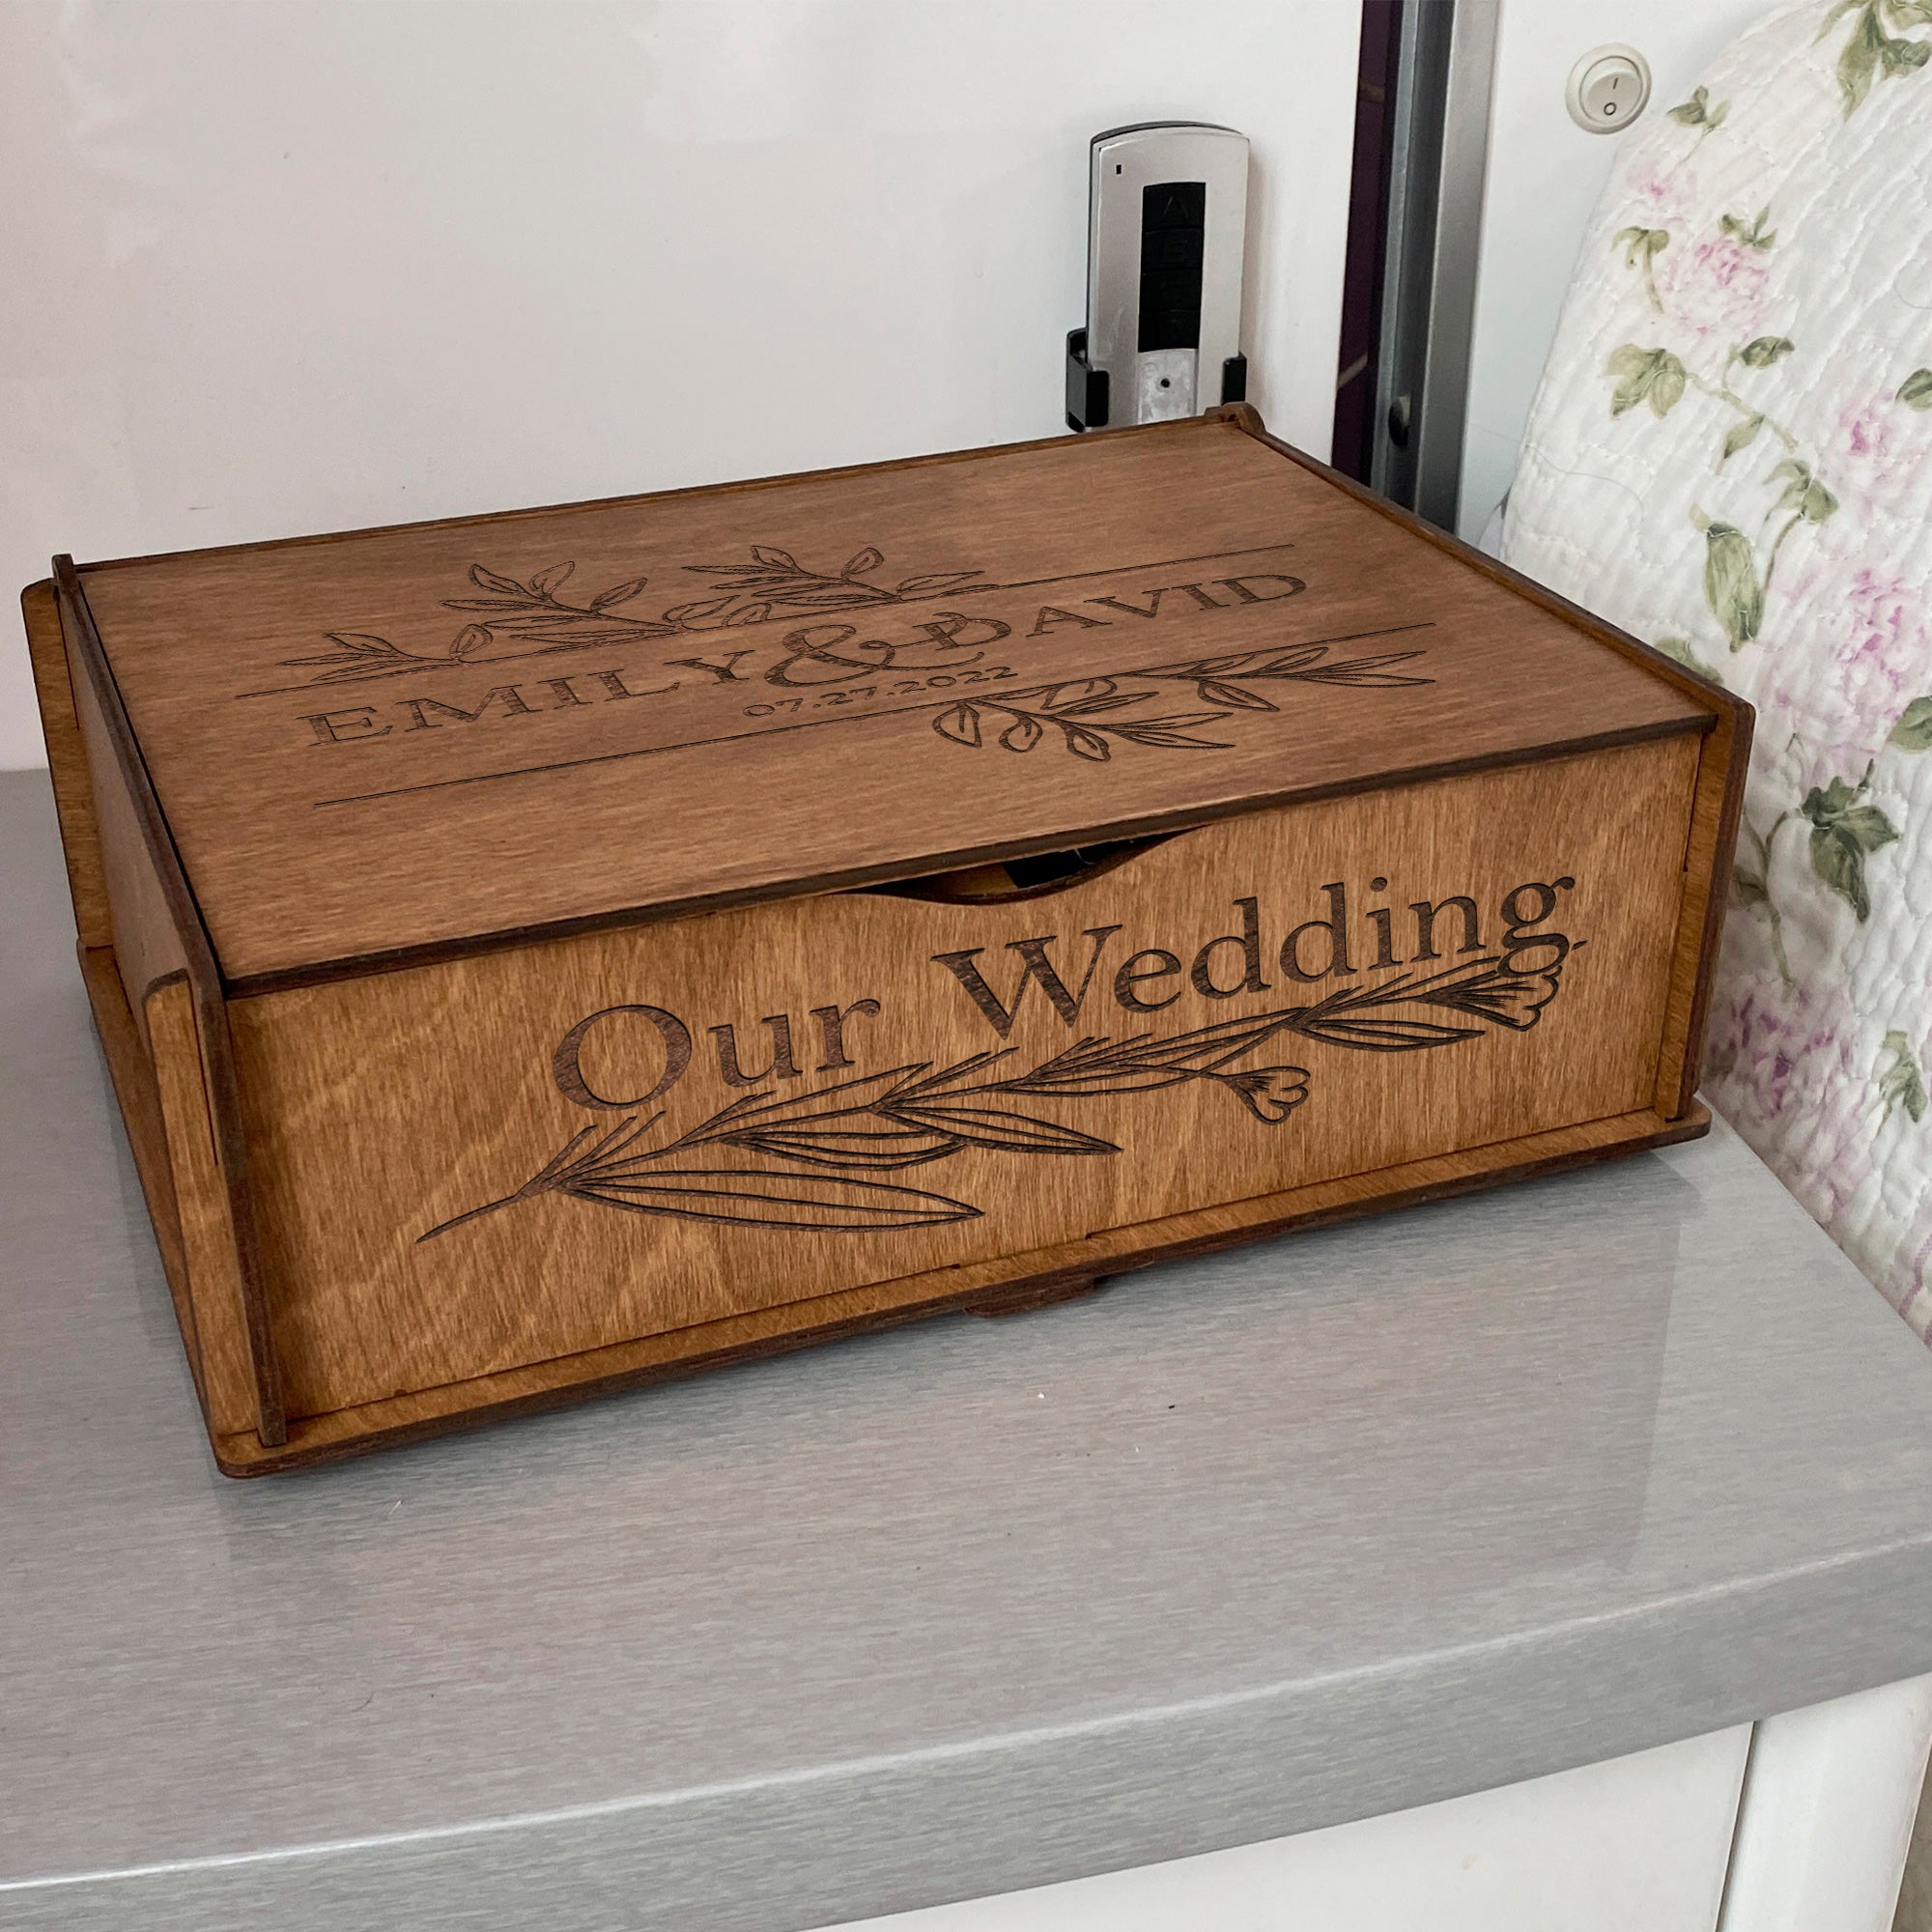 Wooden memory box Engraving Our Wedding